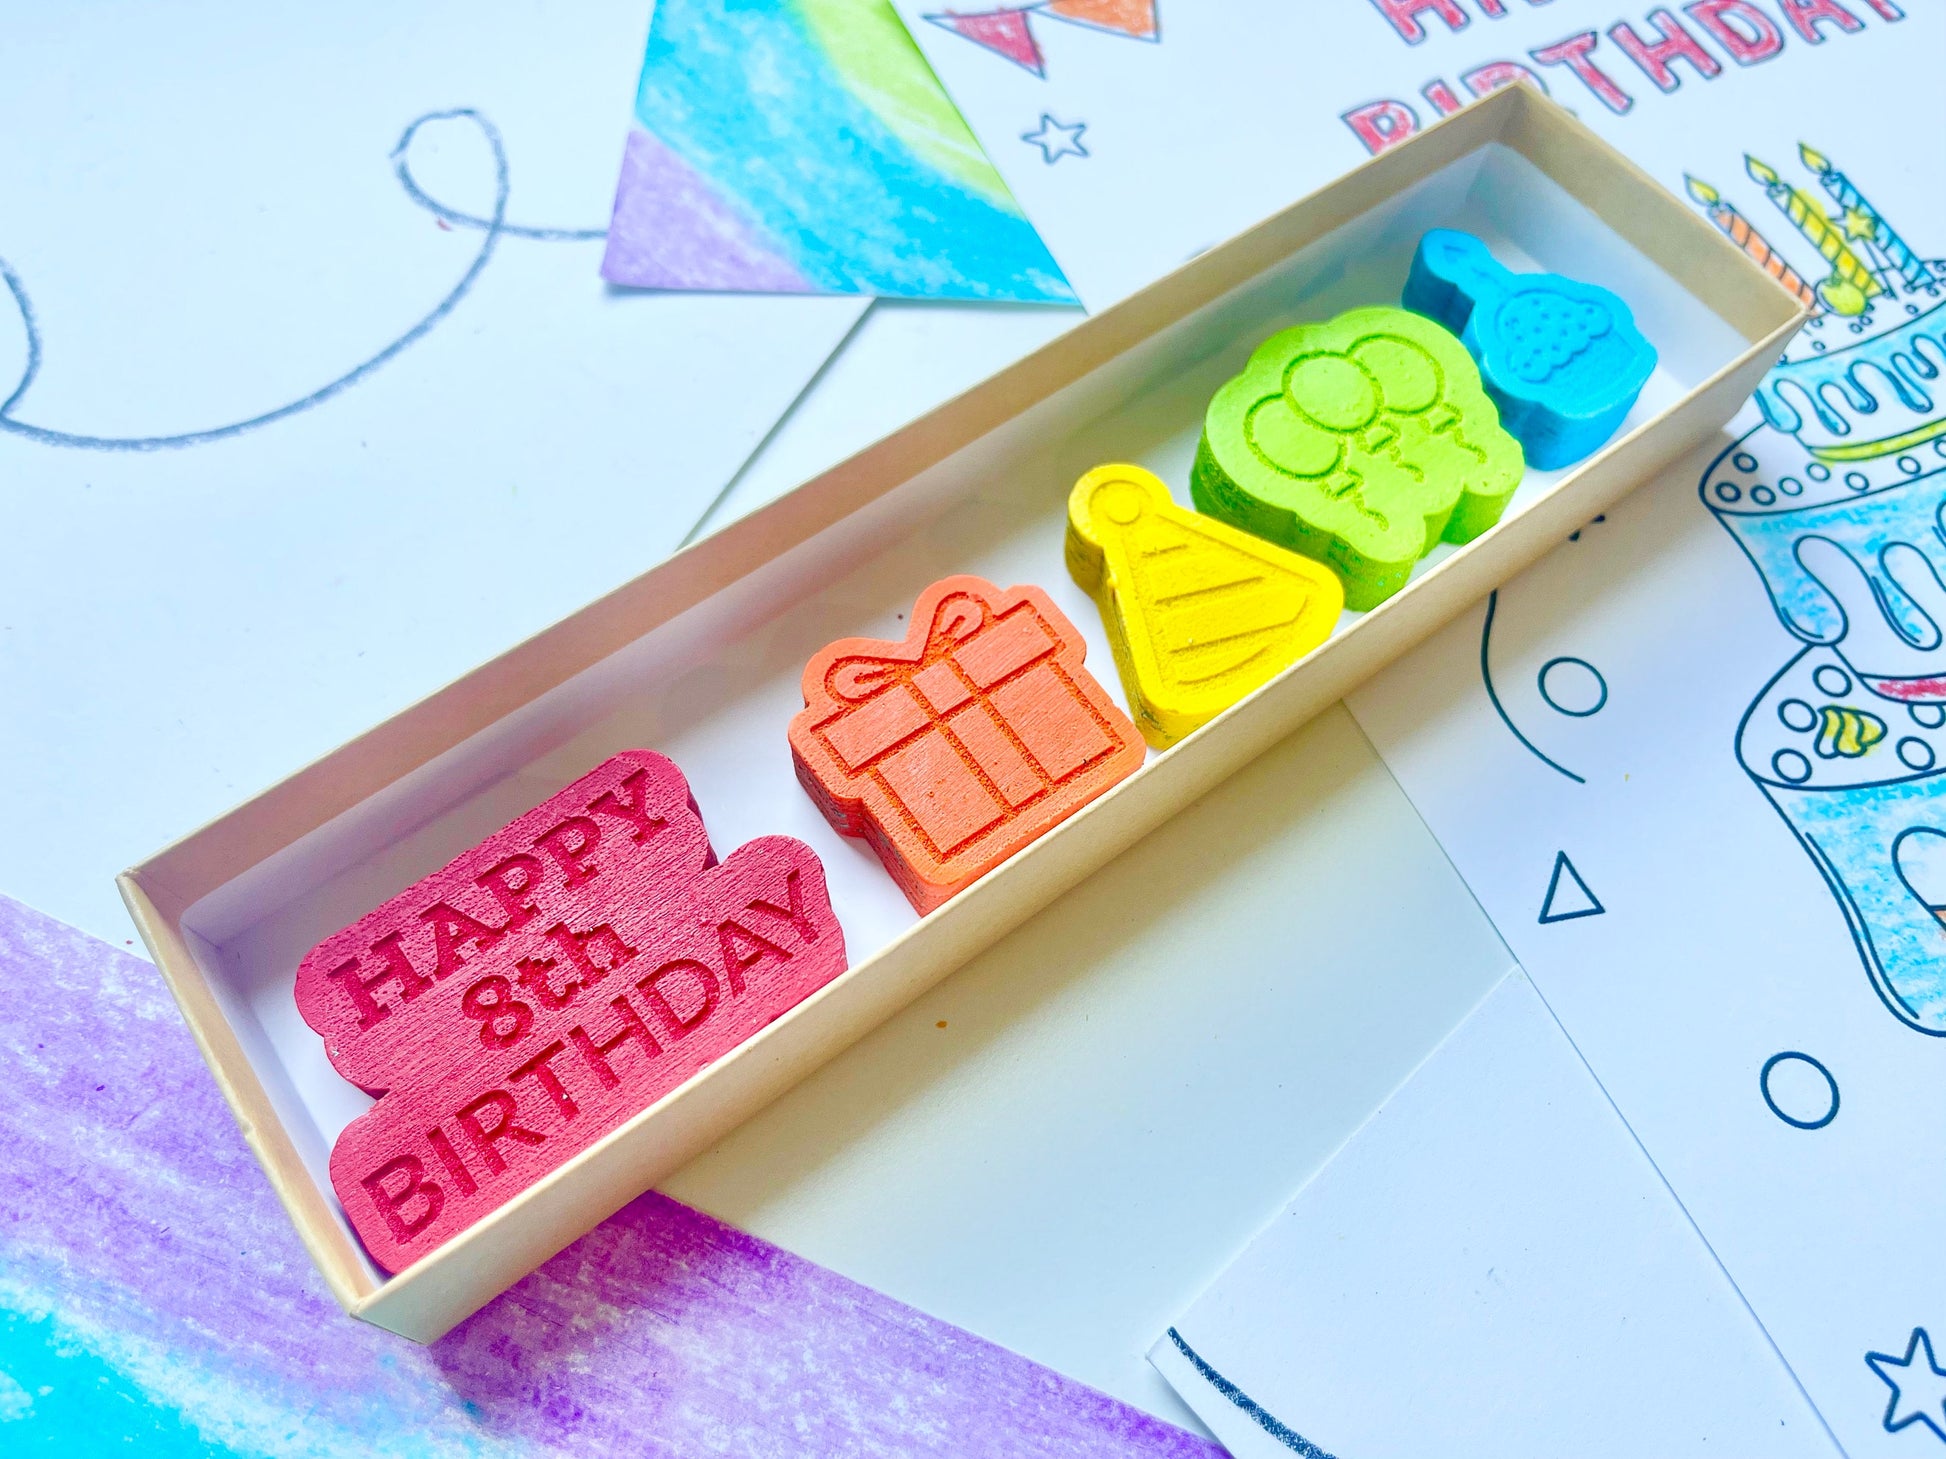 8th Birthday Crayons - 8th Birthday Gifts - Kids Happy Birthday Gifts - Kids Birthday Presents - Gifts For Kids - 8th Birthday Party Favors